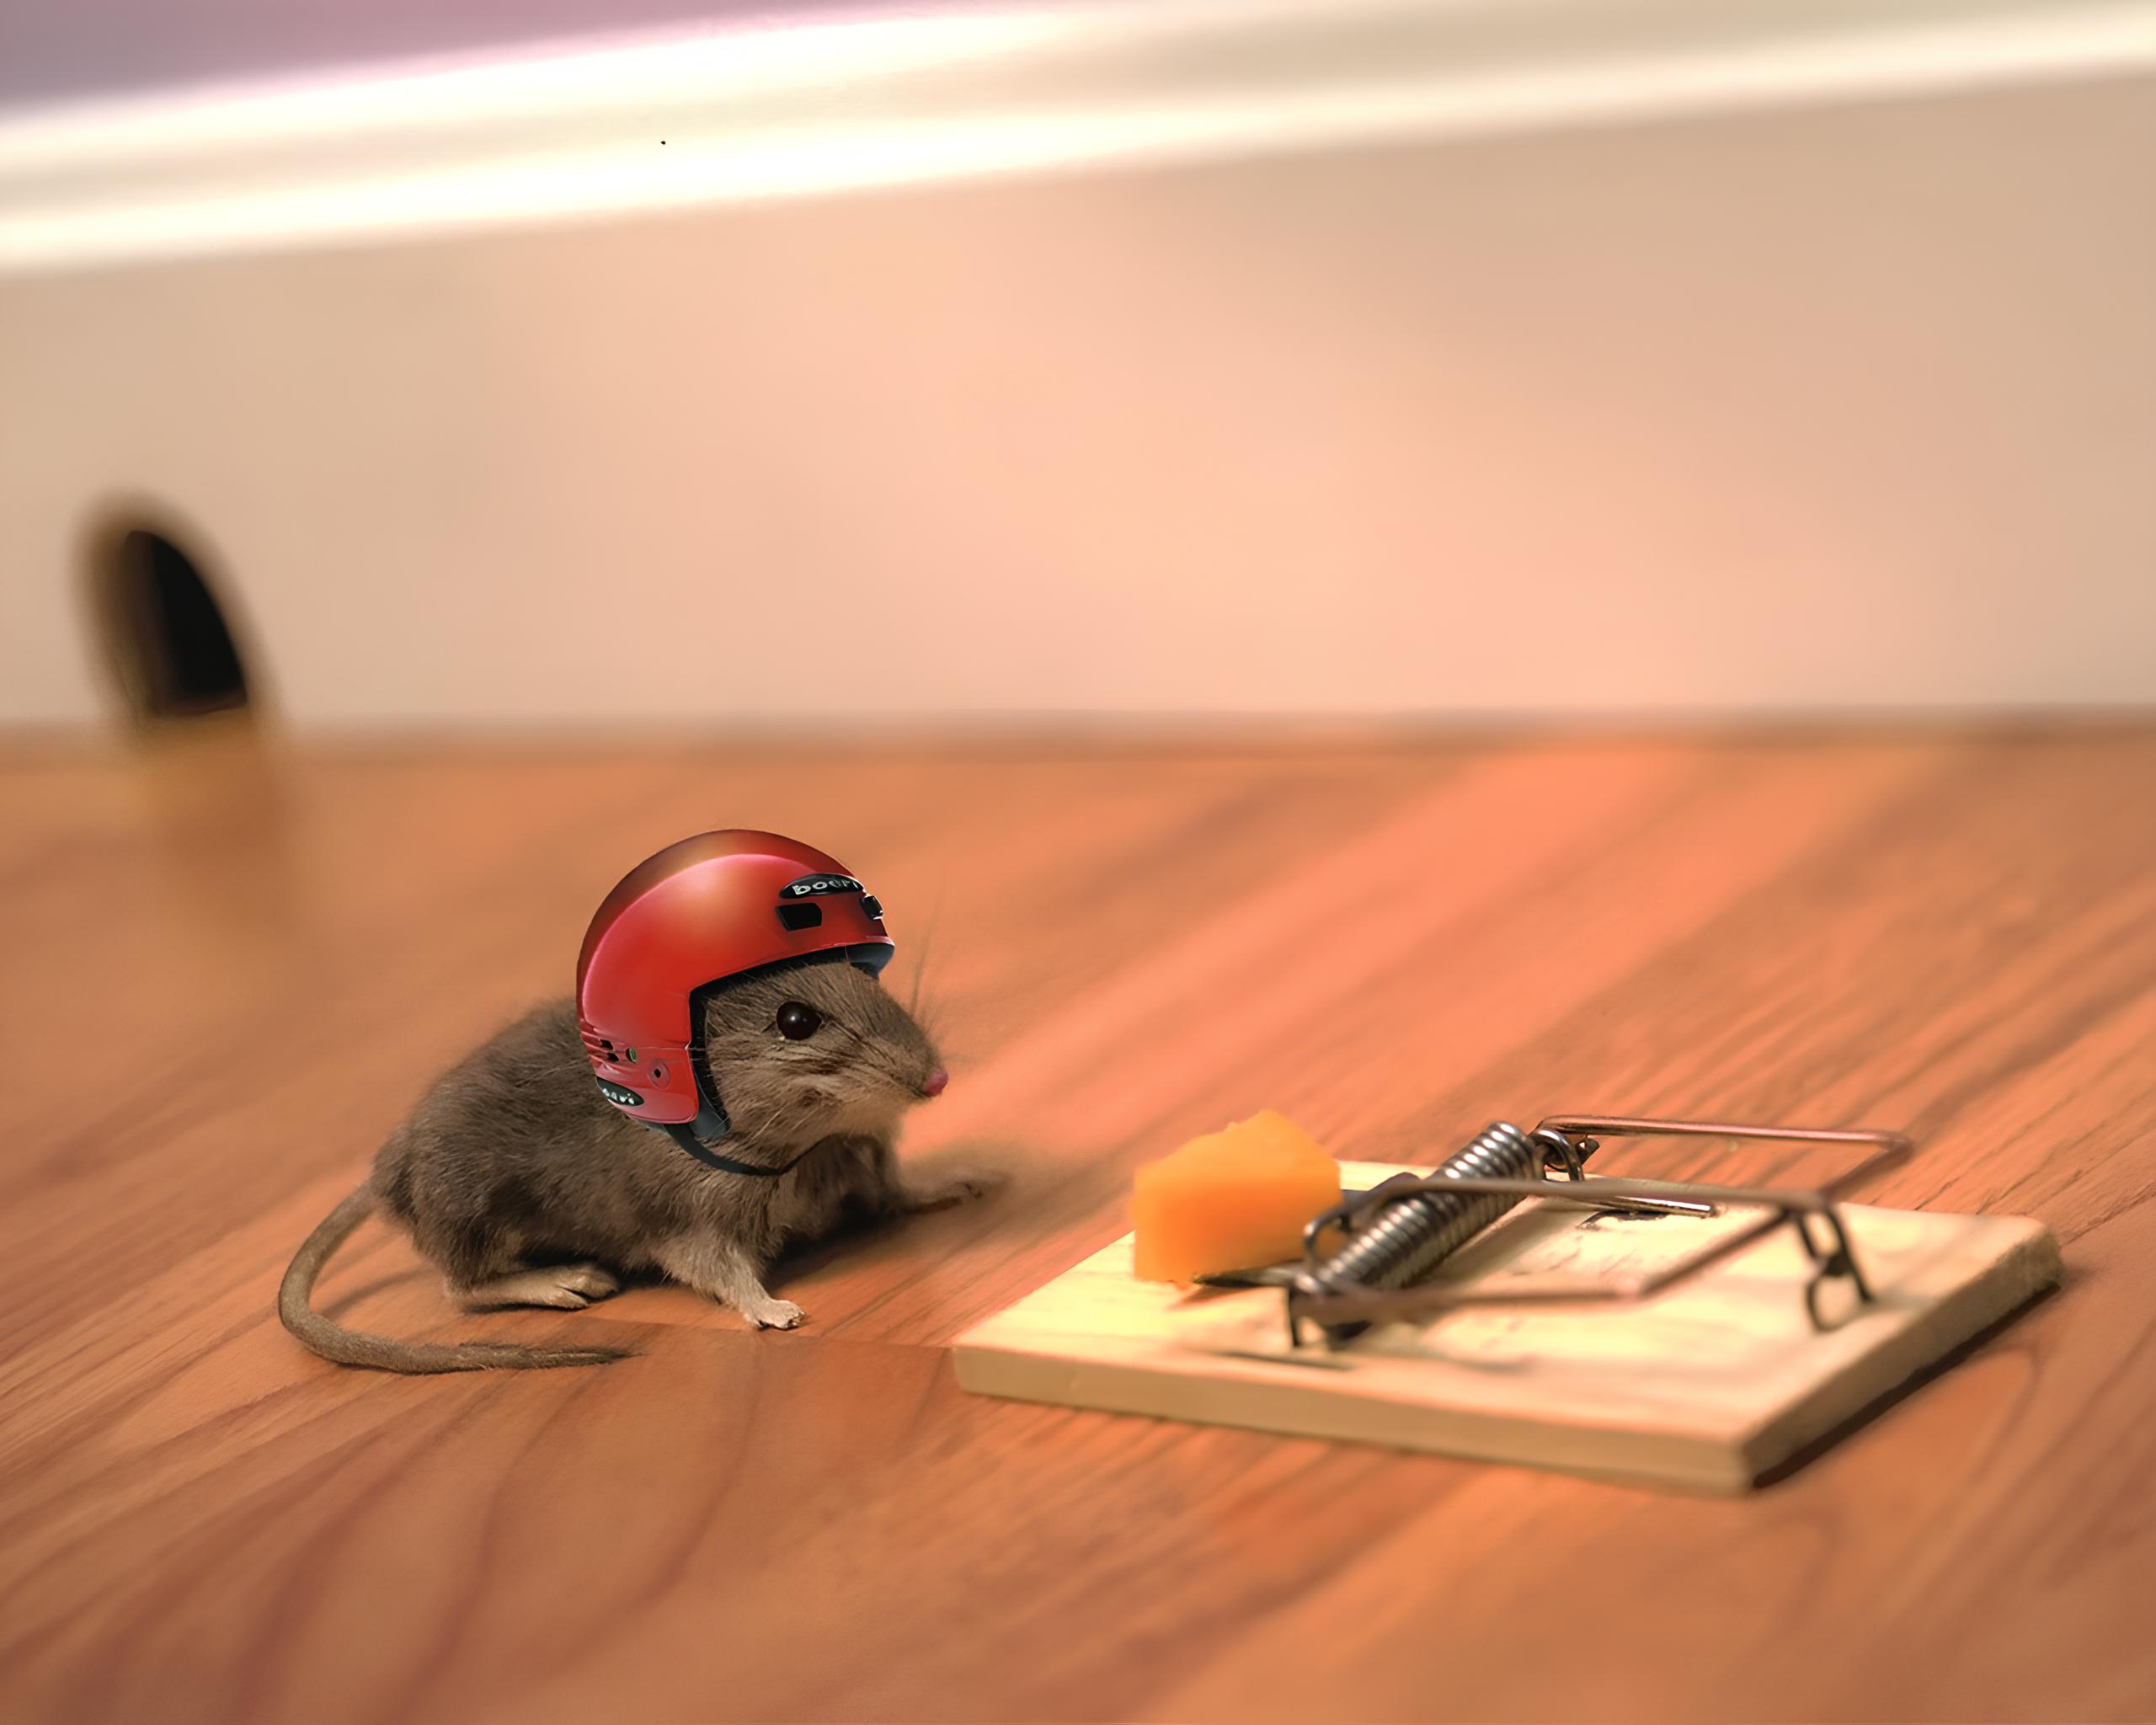 A helmeted mouse pulls cheese from a mousetrap.